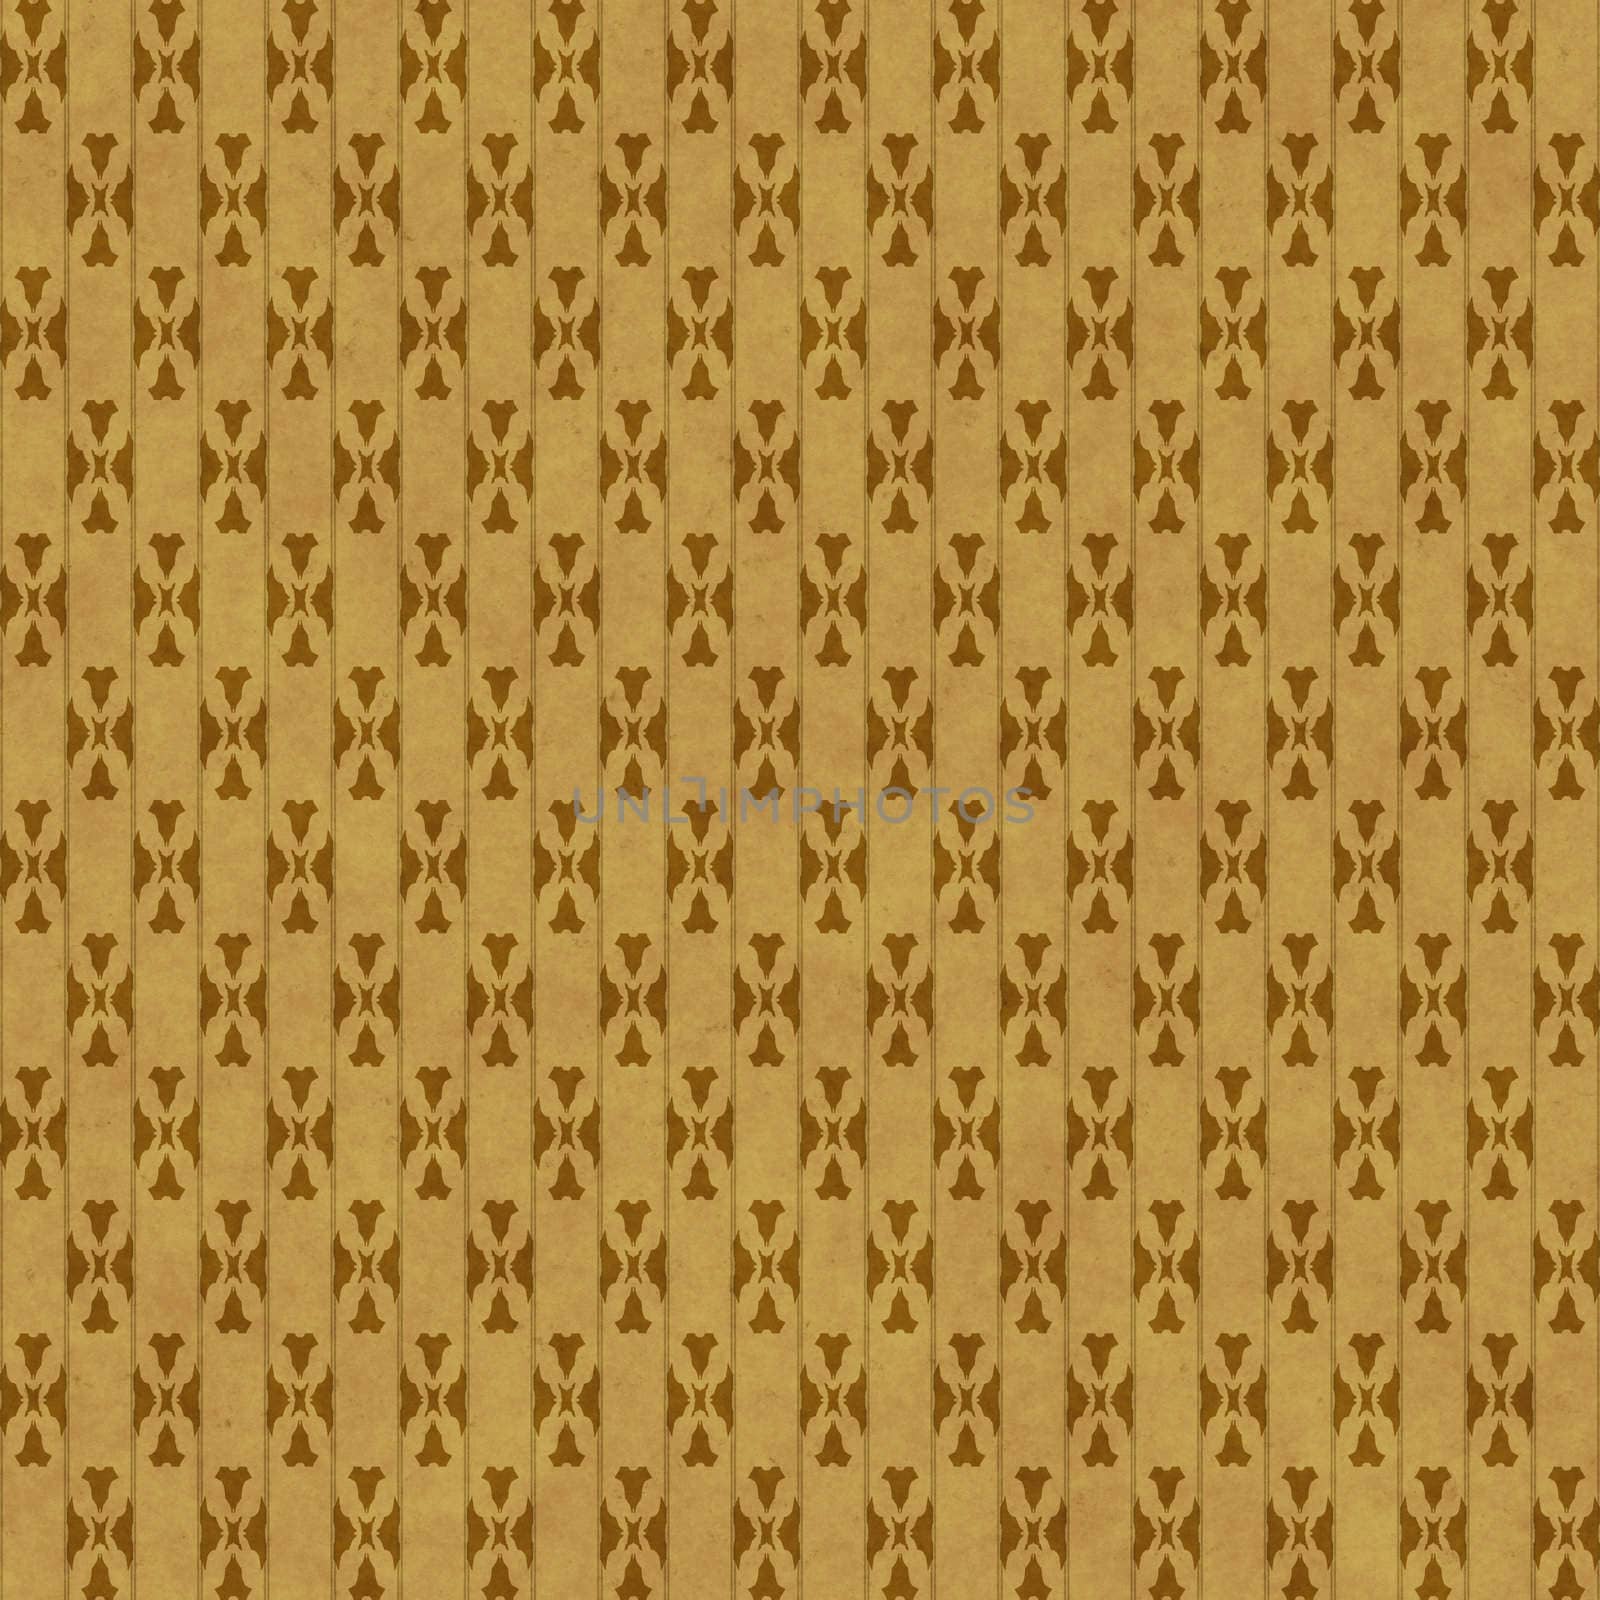 a large image of old retro wallpaper